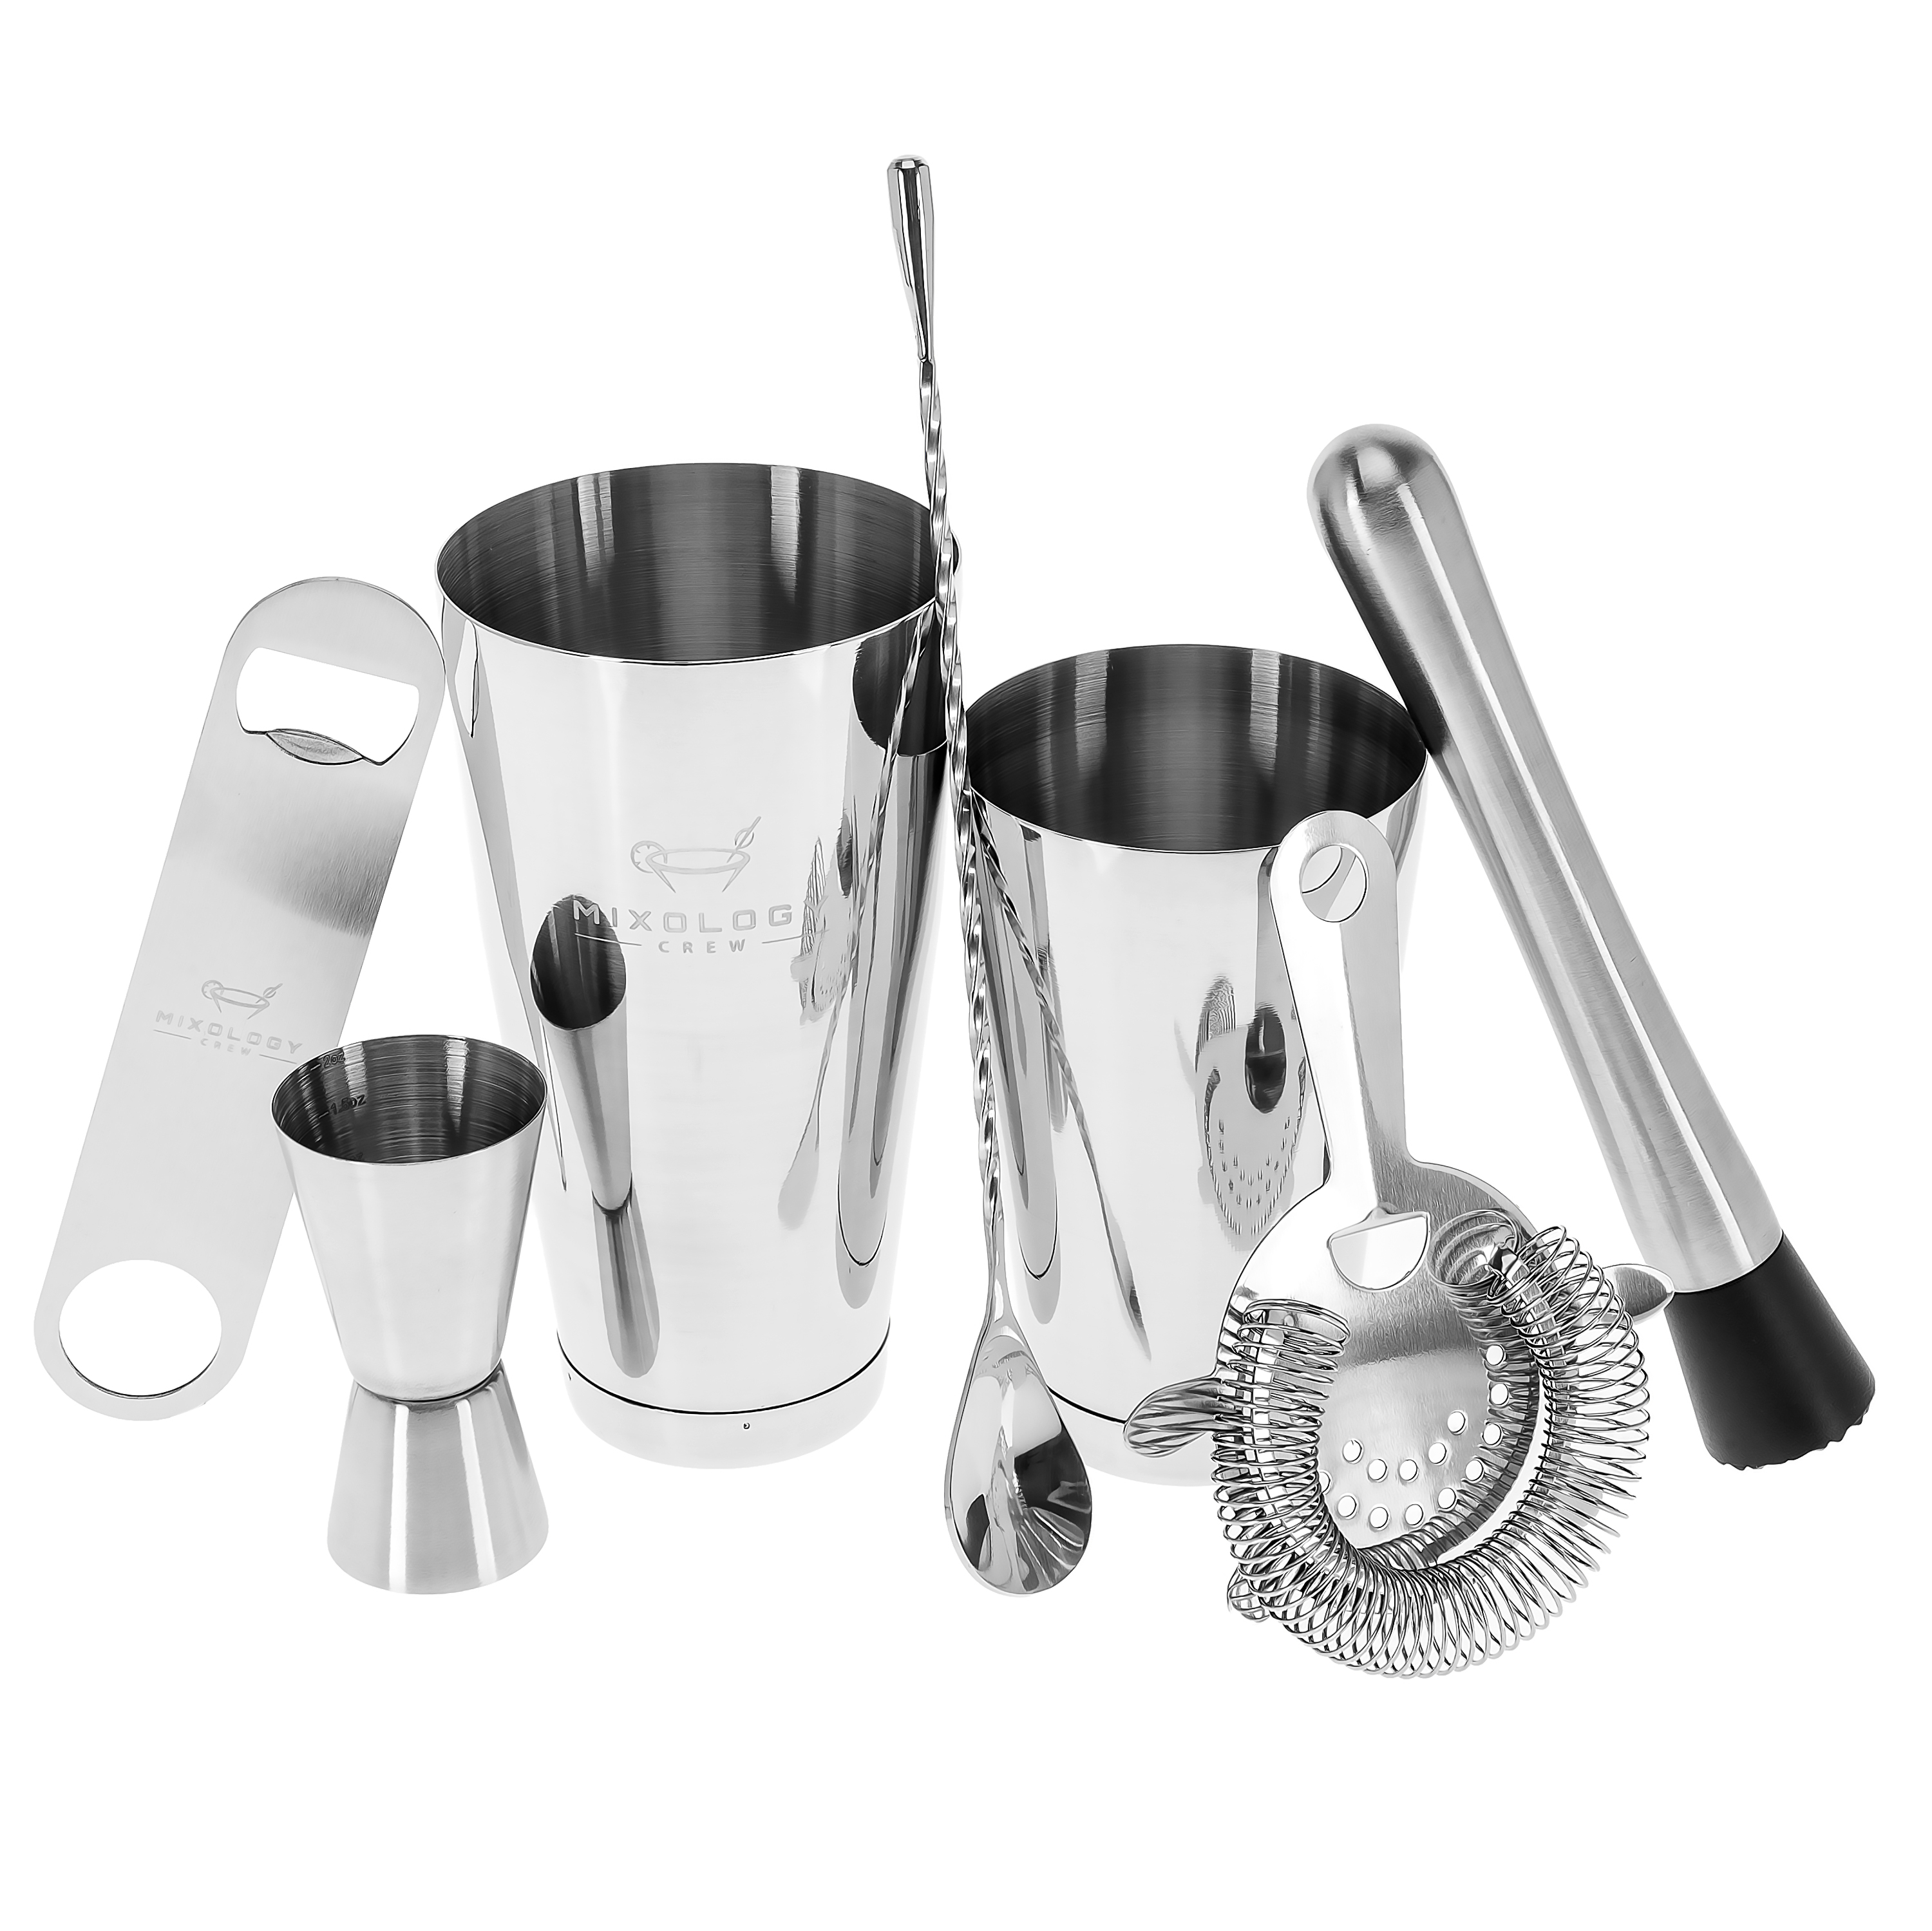 mixology tools including bottle opener and strainer